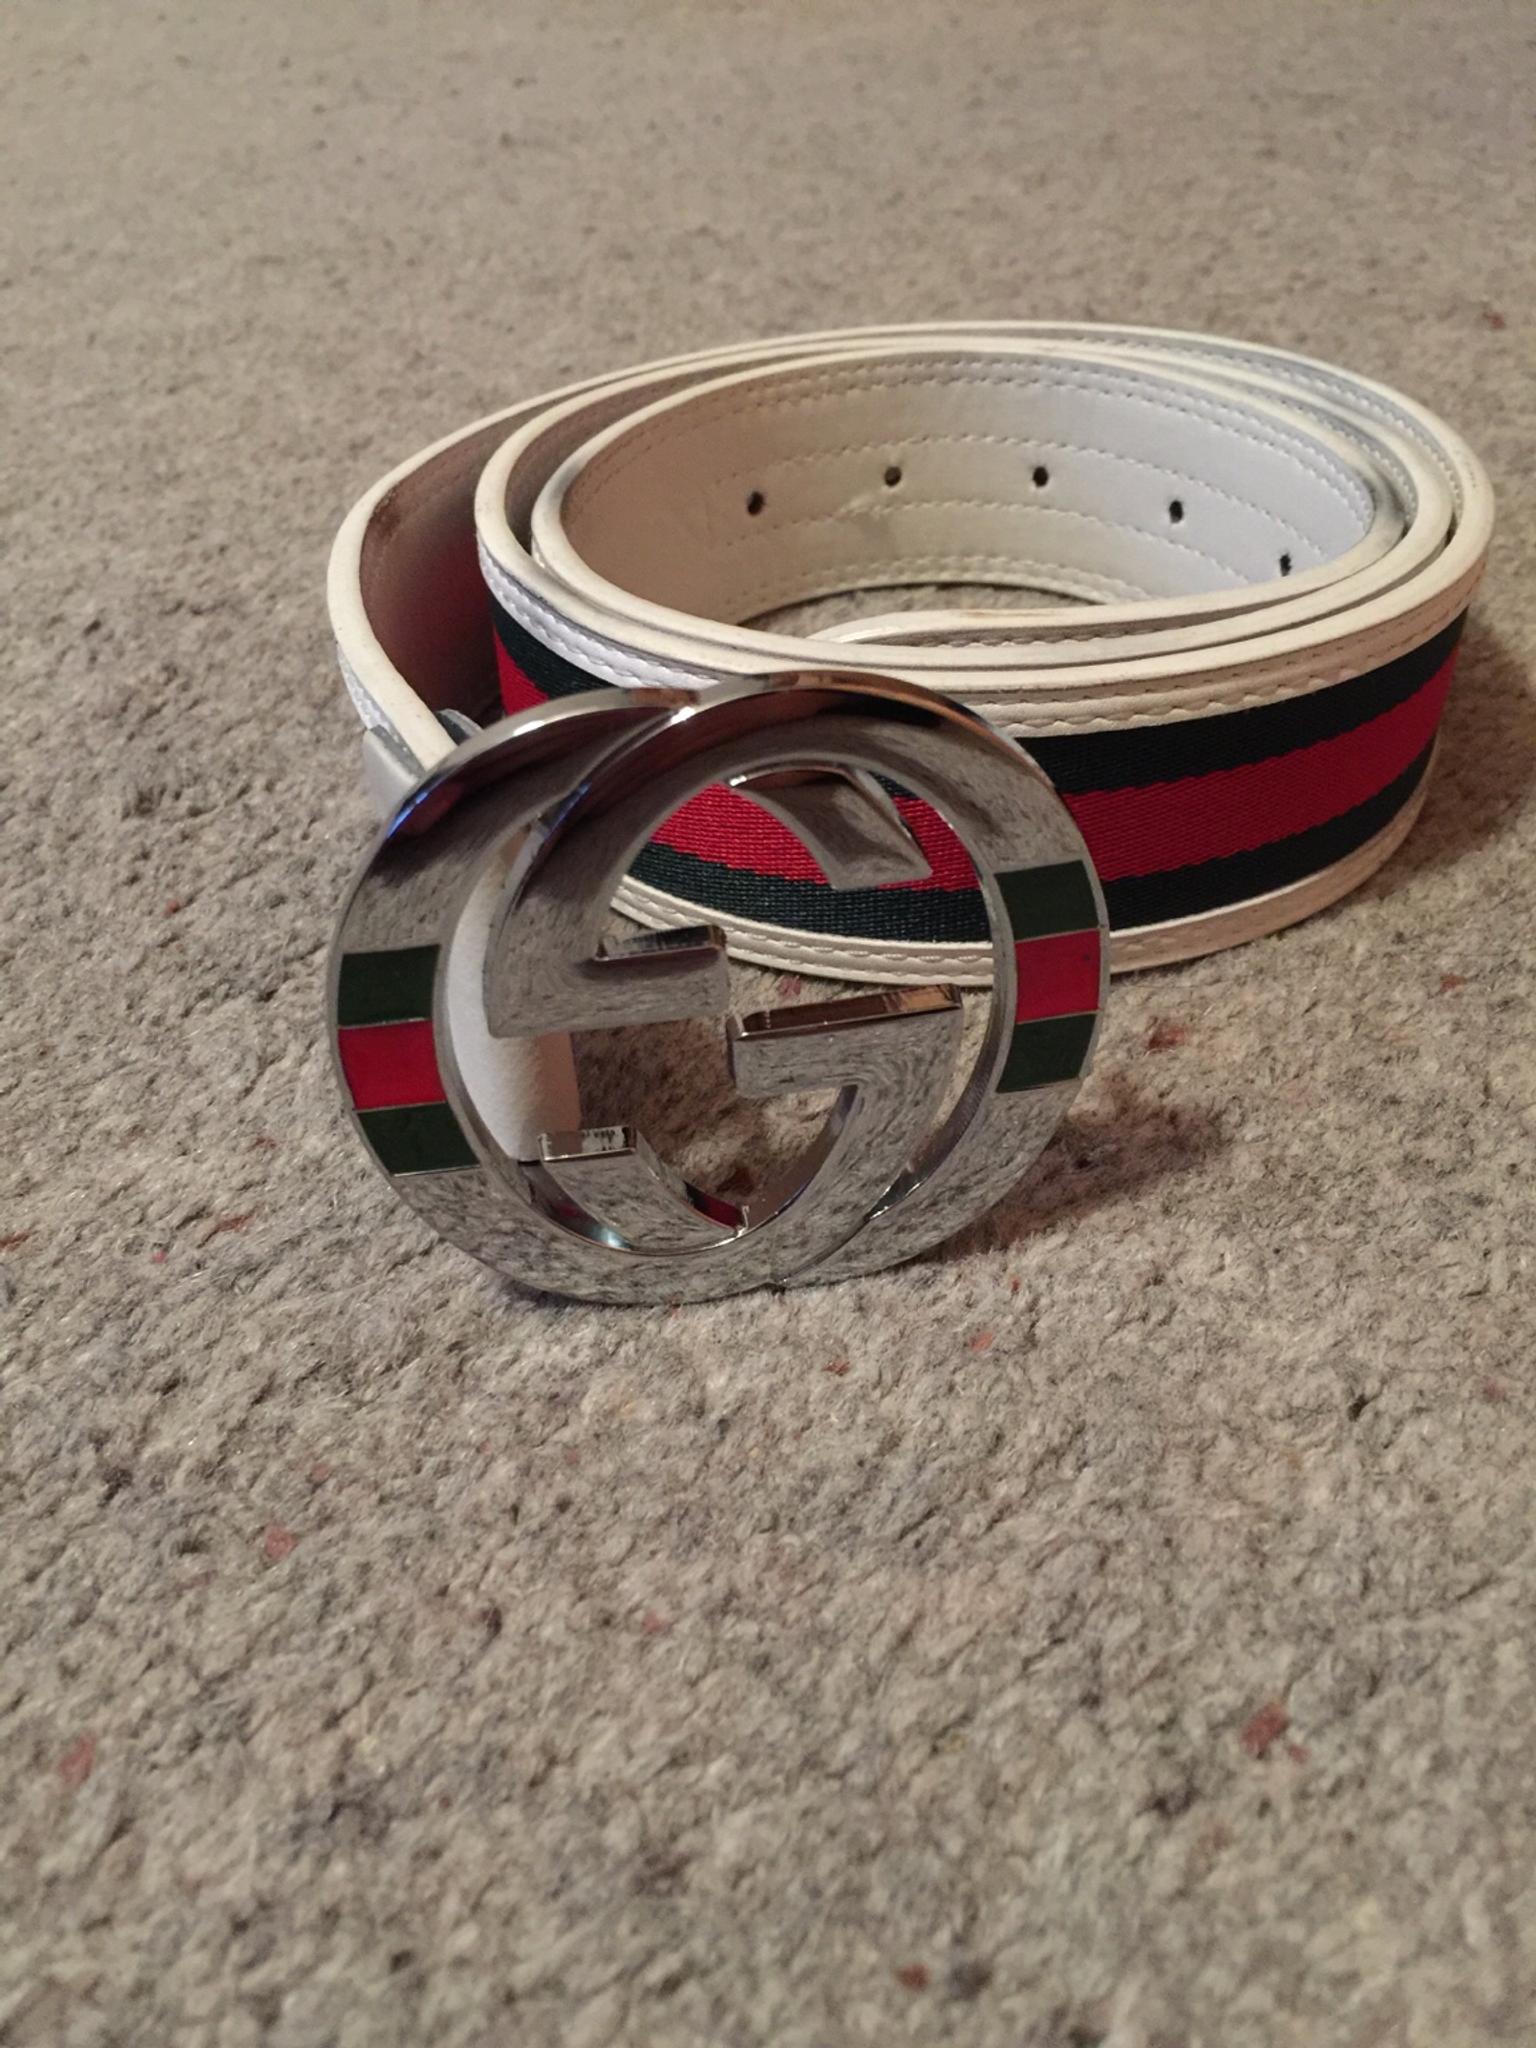 Authentic Gucci Mens Belt in UB6 London for £50.00 for sale | Shpock